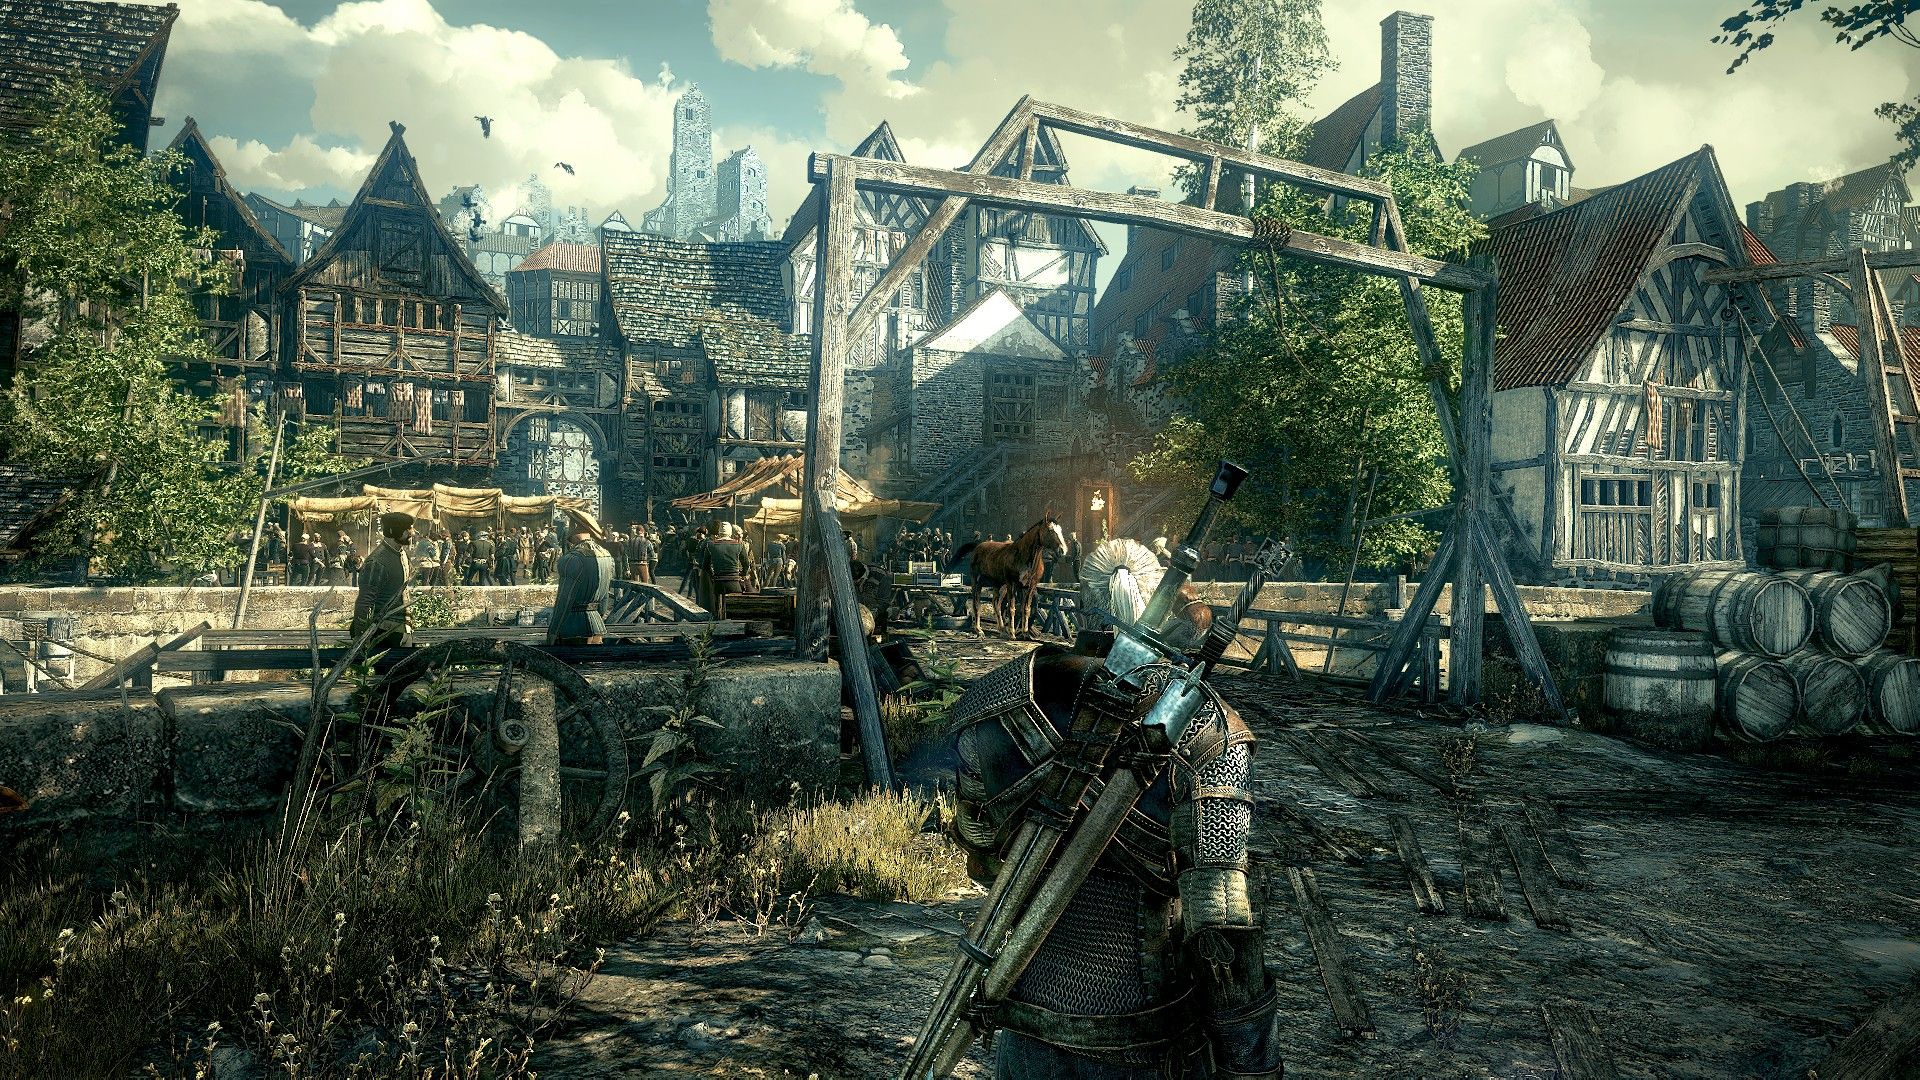 REVIEW: THE WITCHER 3 – WILD HUNT